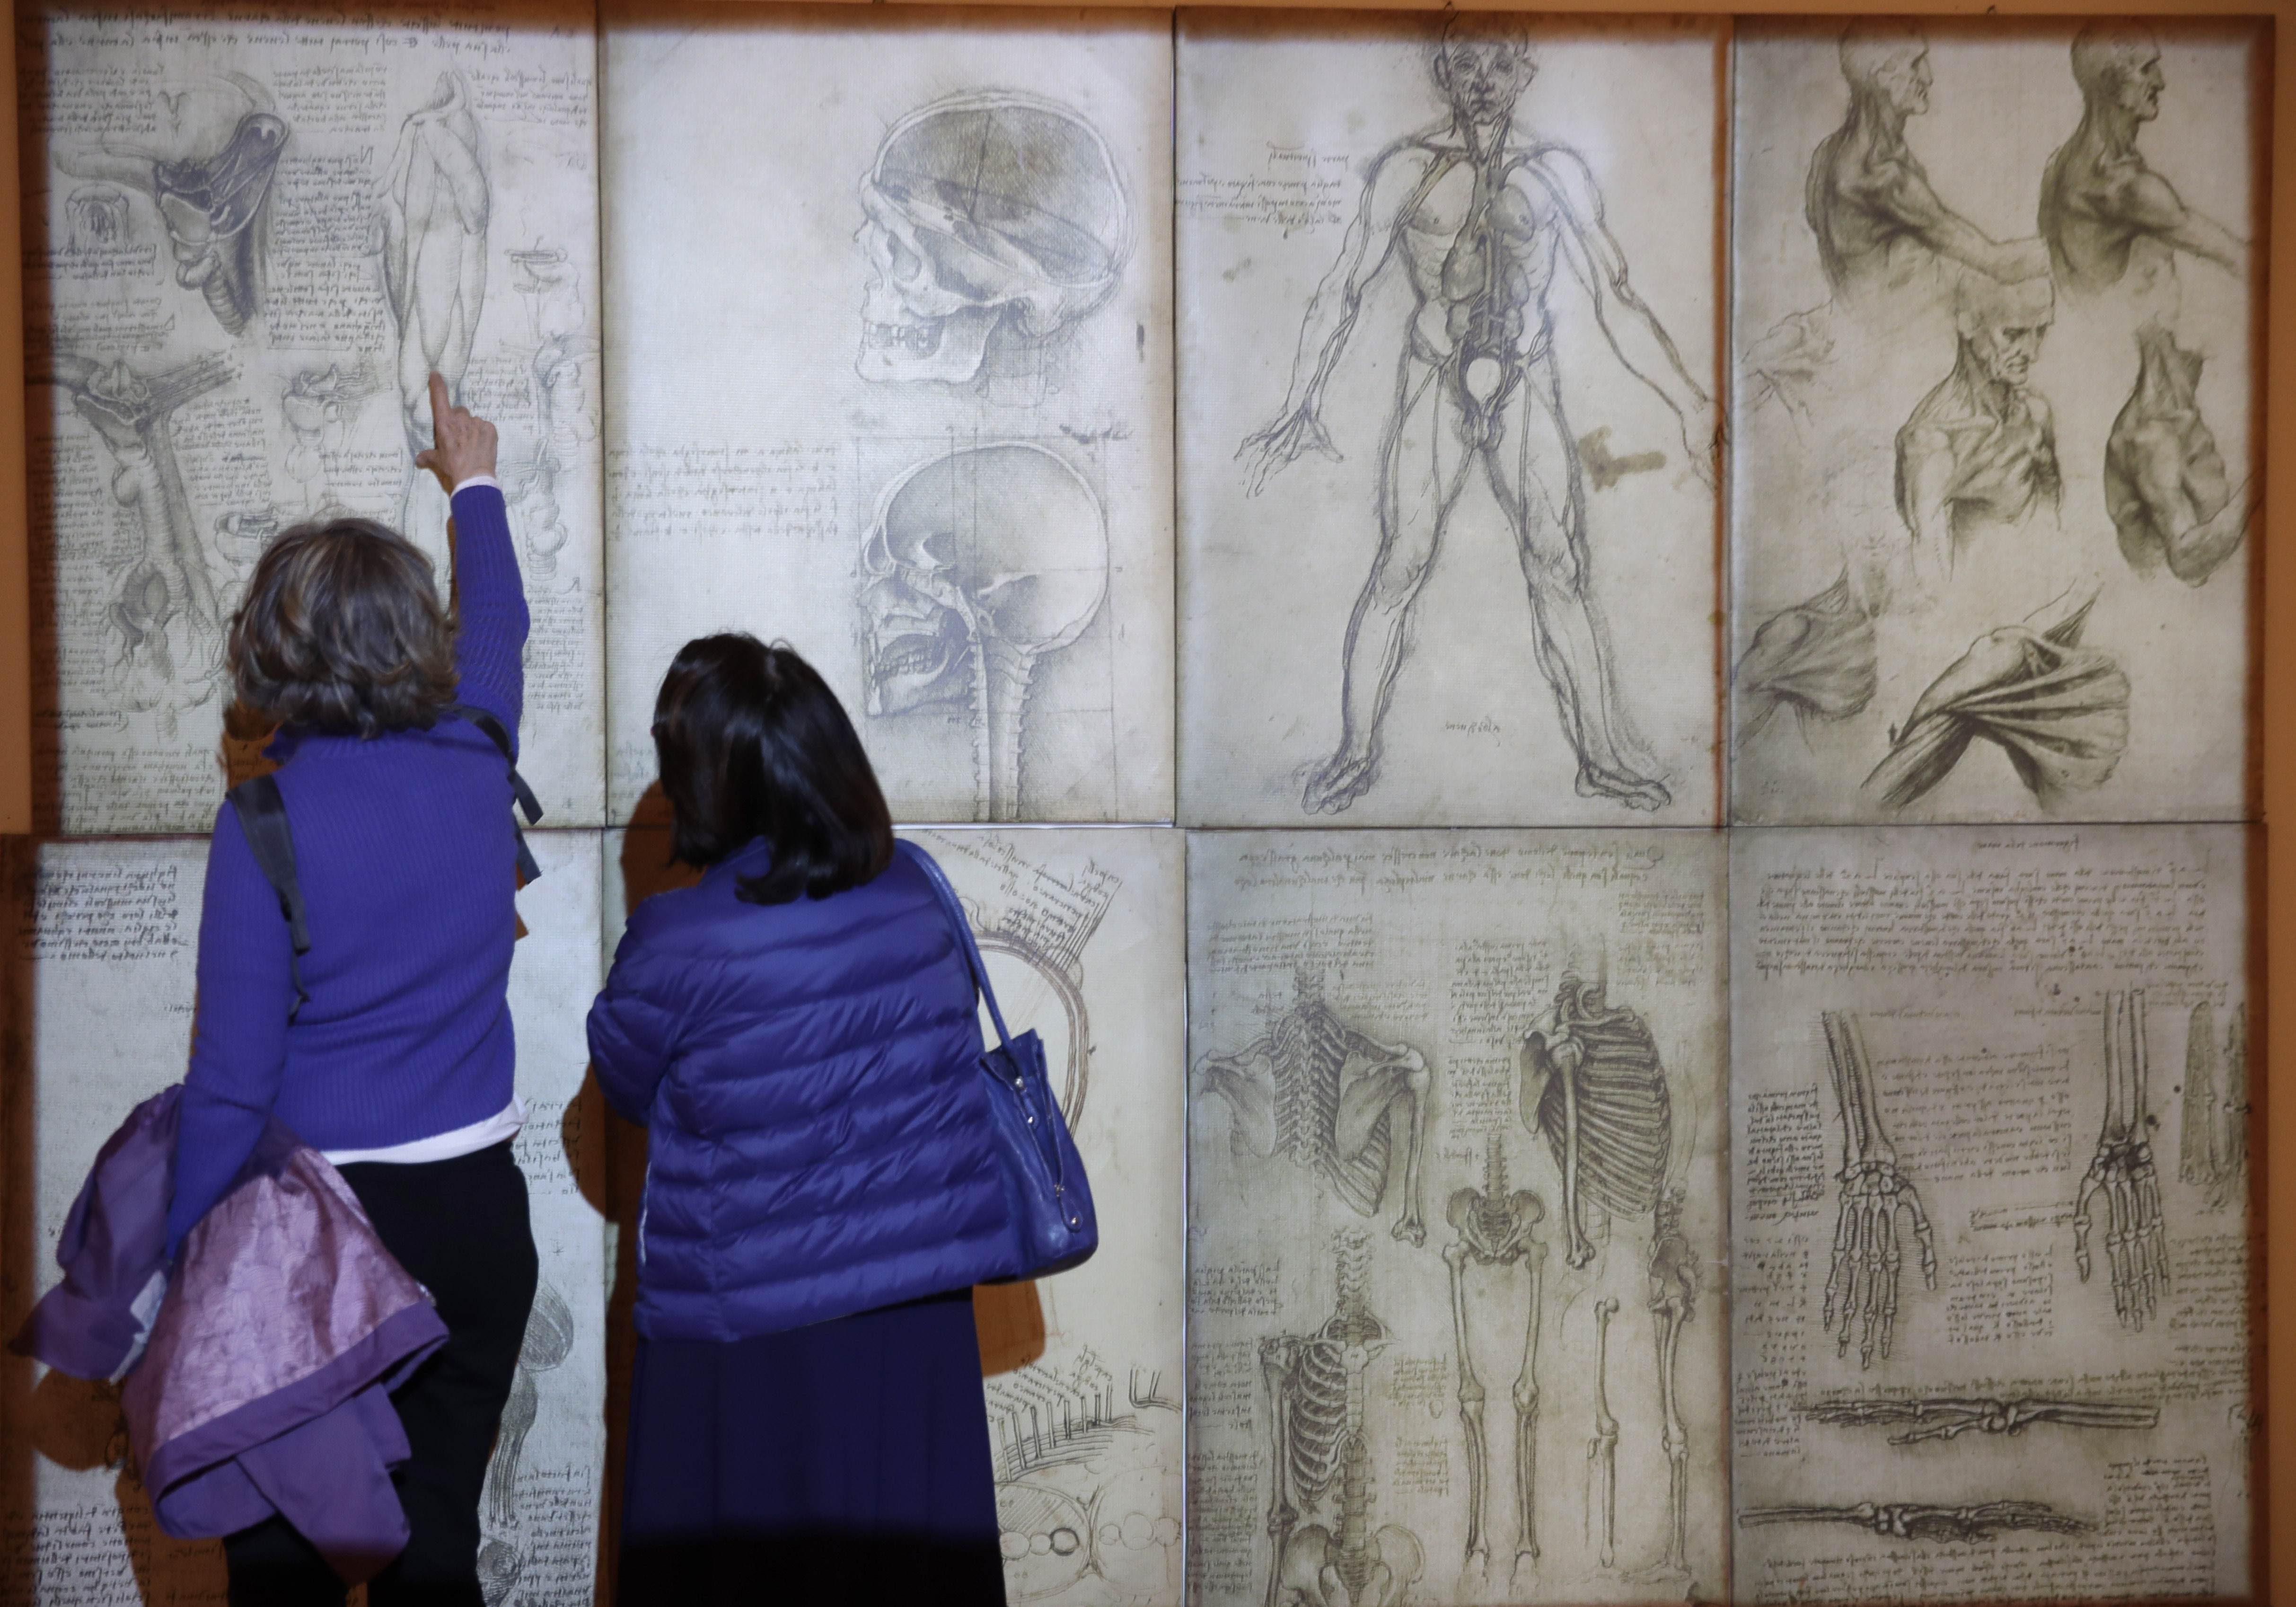 Visitors look at copies of his drawings by Italian Renaissance painter, scientist and inventor Leonardo Da Vinci during a permanent exhibition on Da Vinci, on the exact day commemorating the 500th anniversary of his death, in Rome, Thursday, May 2, 2019. Leonardo died in Amboise, France, on May 2, 1519.  (AP Photo/Alessandra Tarantino)